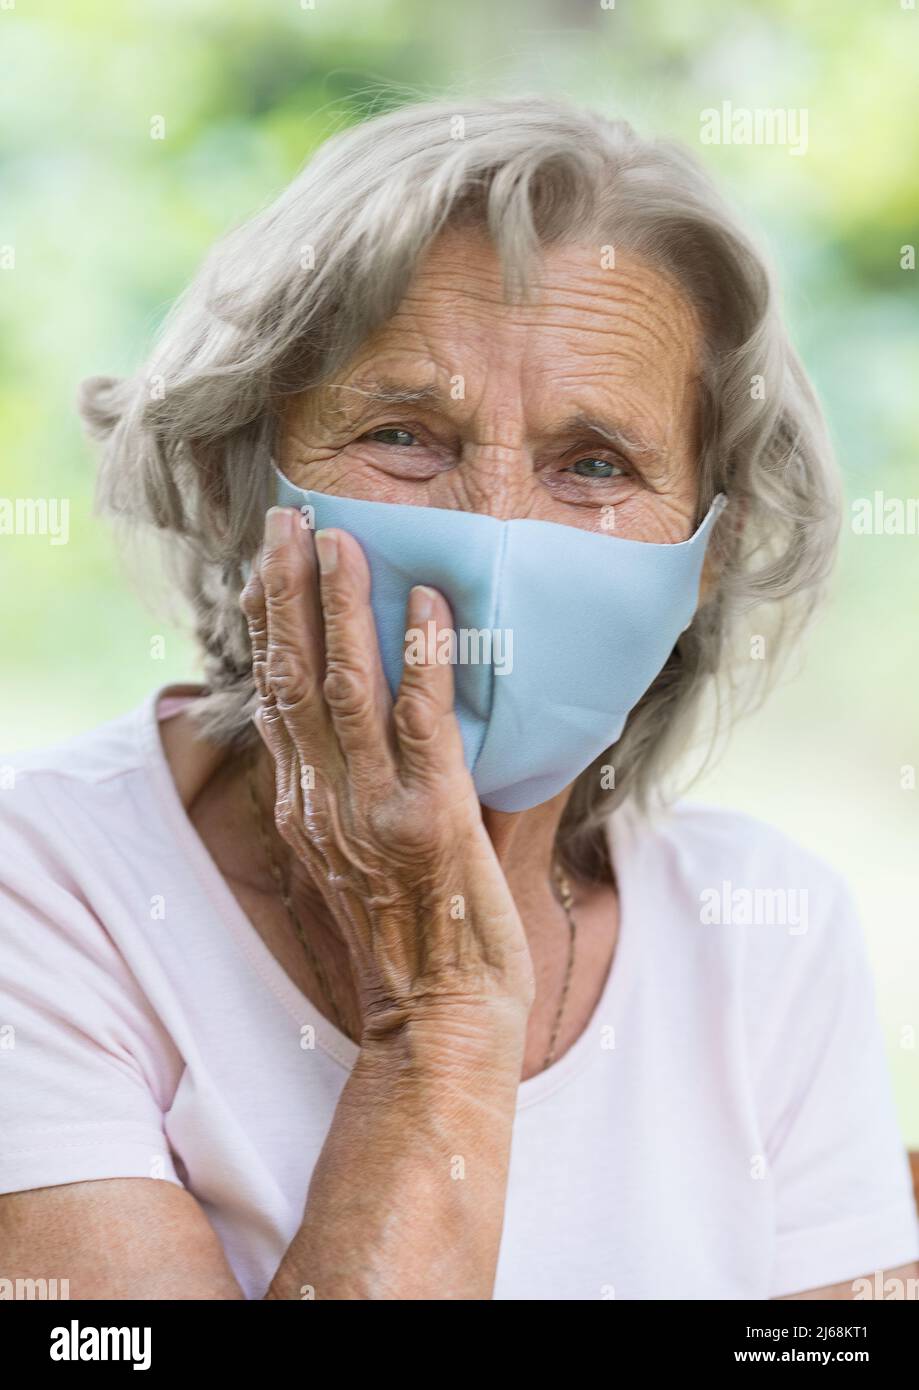 Elderly woman wearing a protective face mask against corona virus Stock Photo